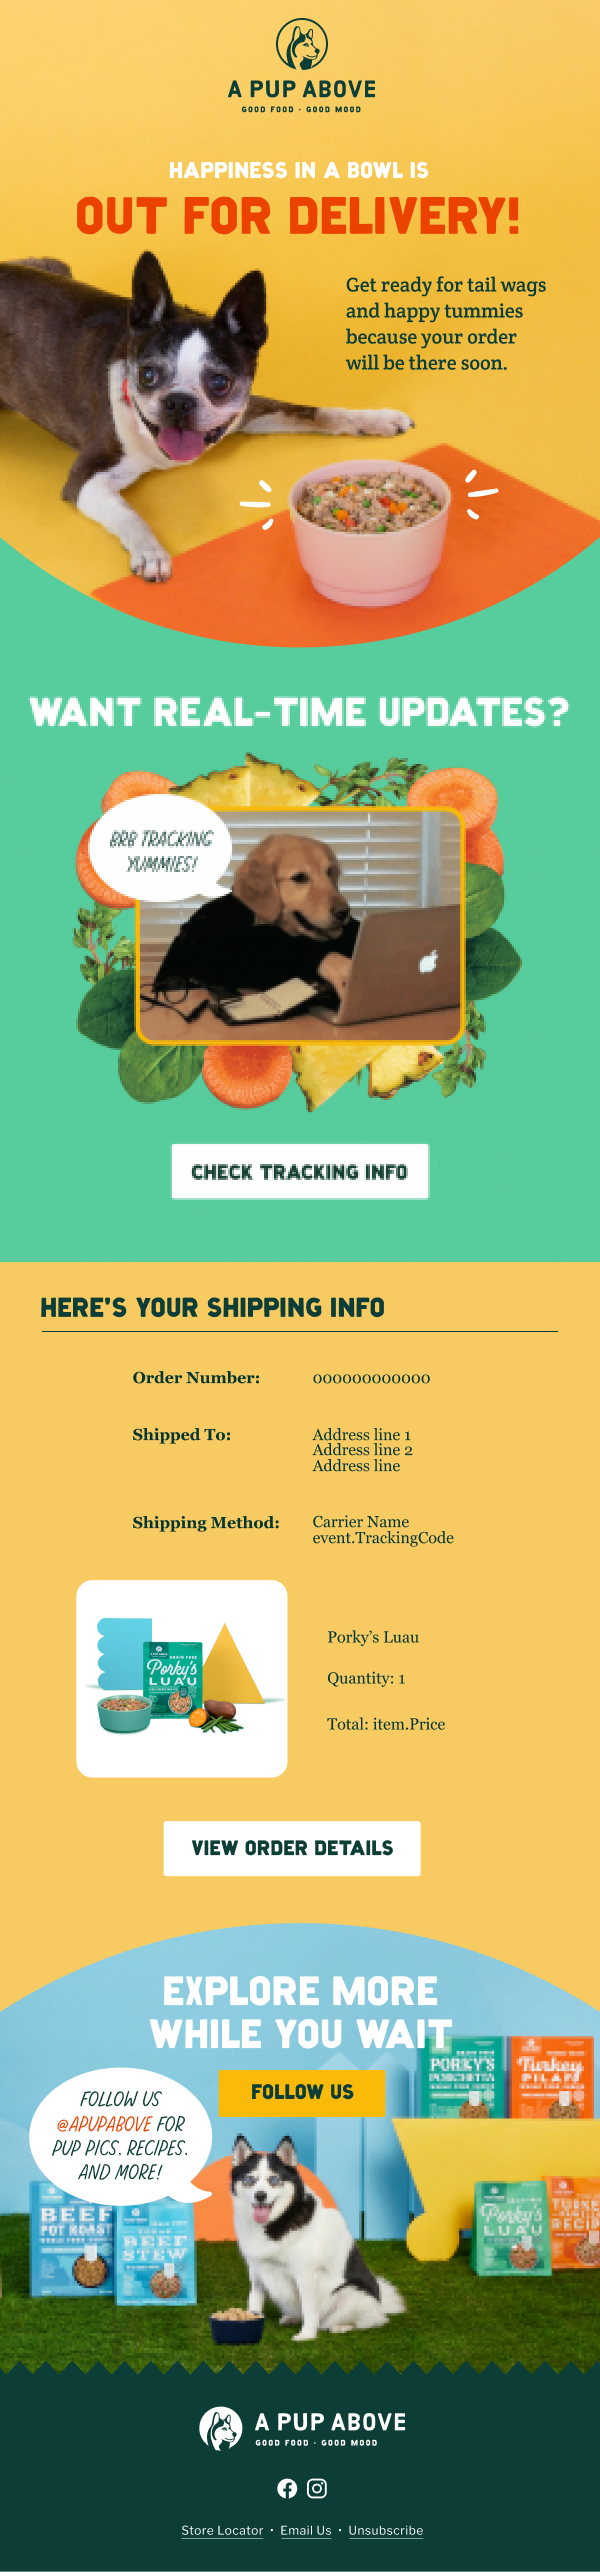 A Pup Above Out for Delivery Notification Industry Email Template screenshot